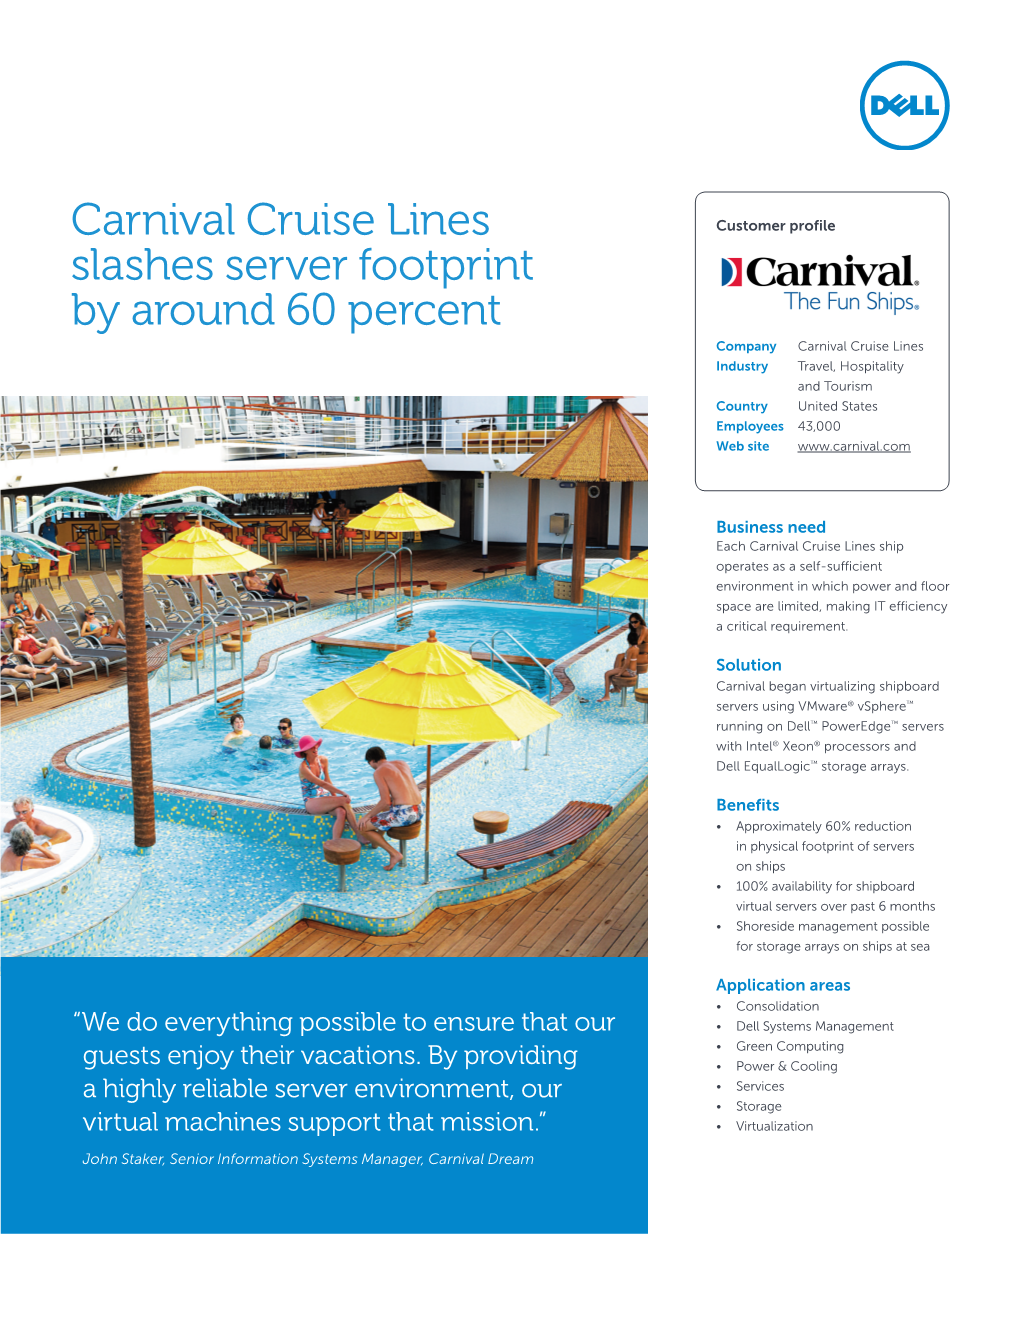 Carnival Cruise Lines Slashes Server Footprint by Around 60 Percent